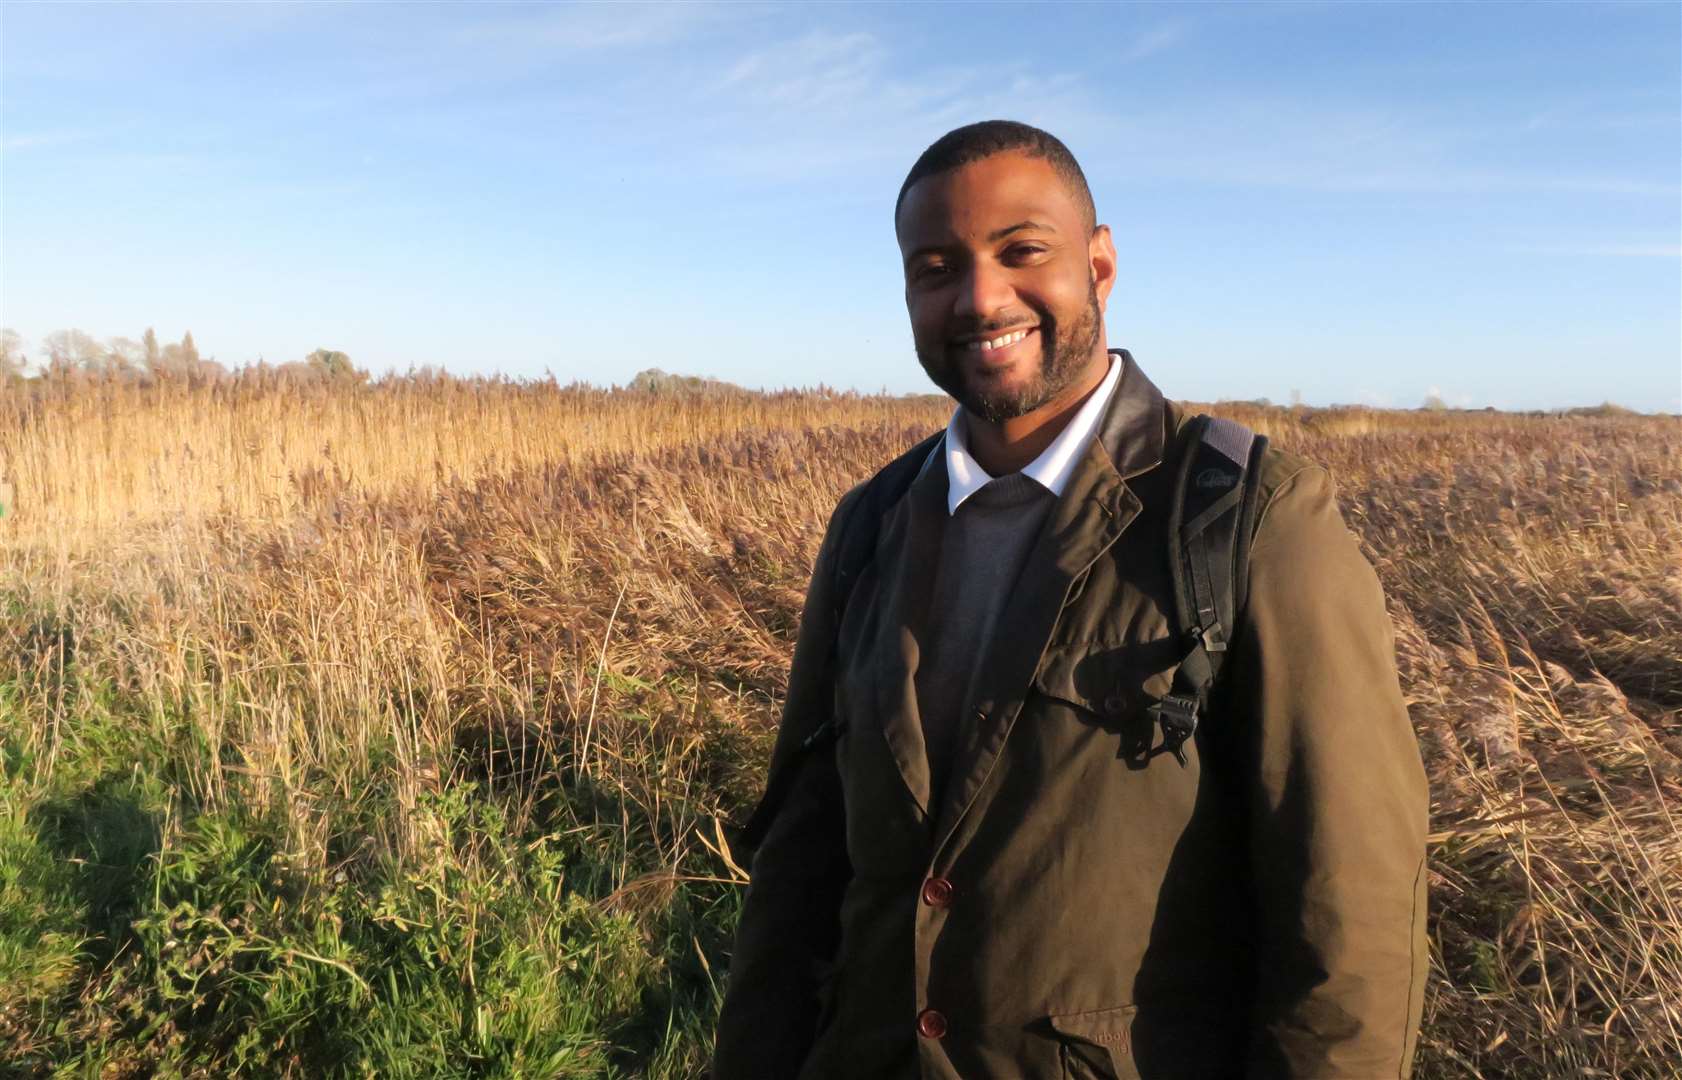 JB Gill, formerly of JLS and now a farmer in Kent, will be on the BBC